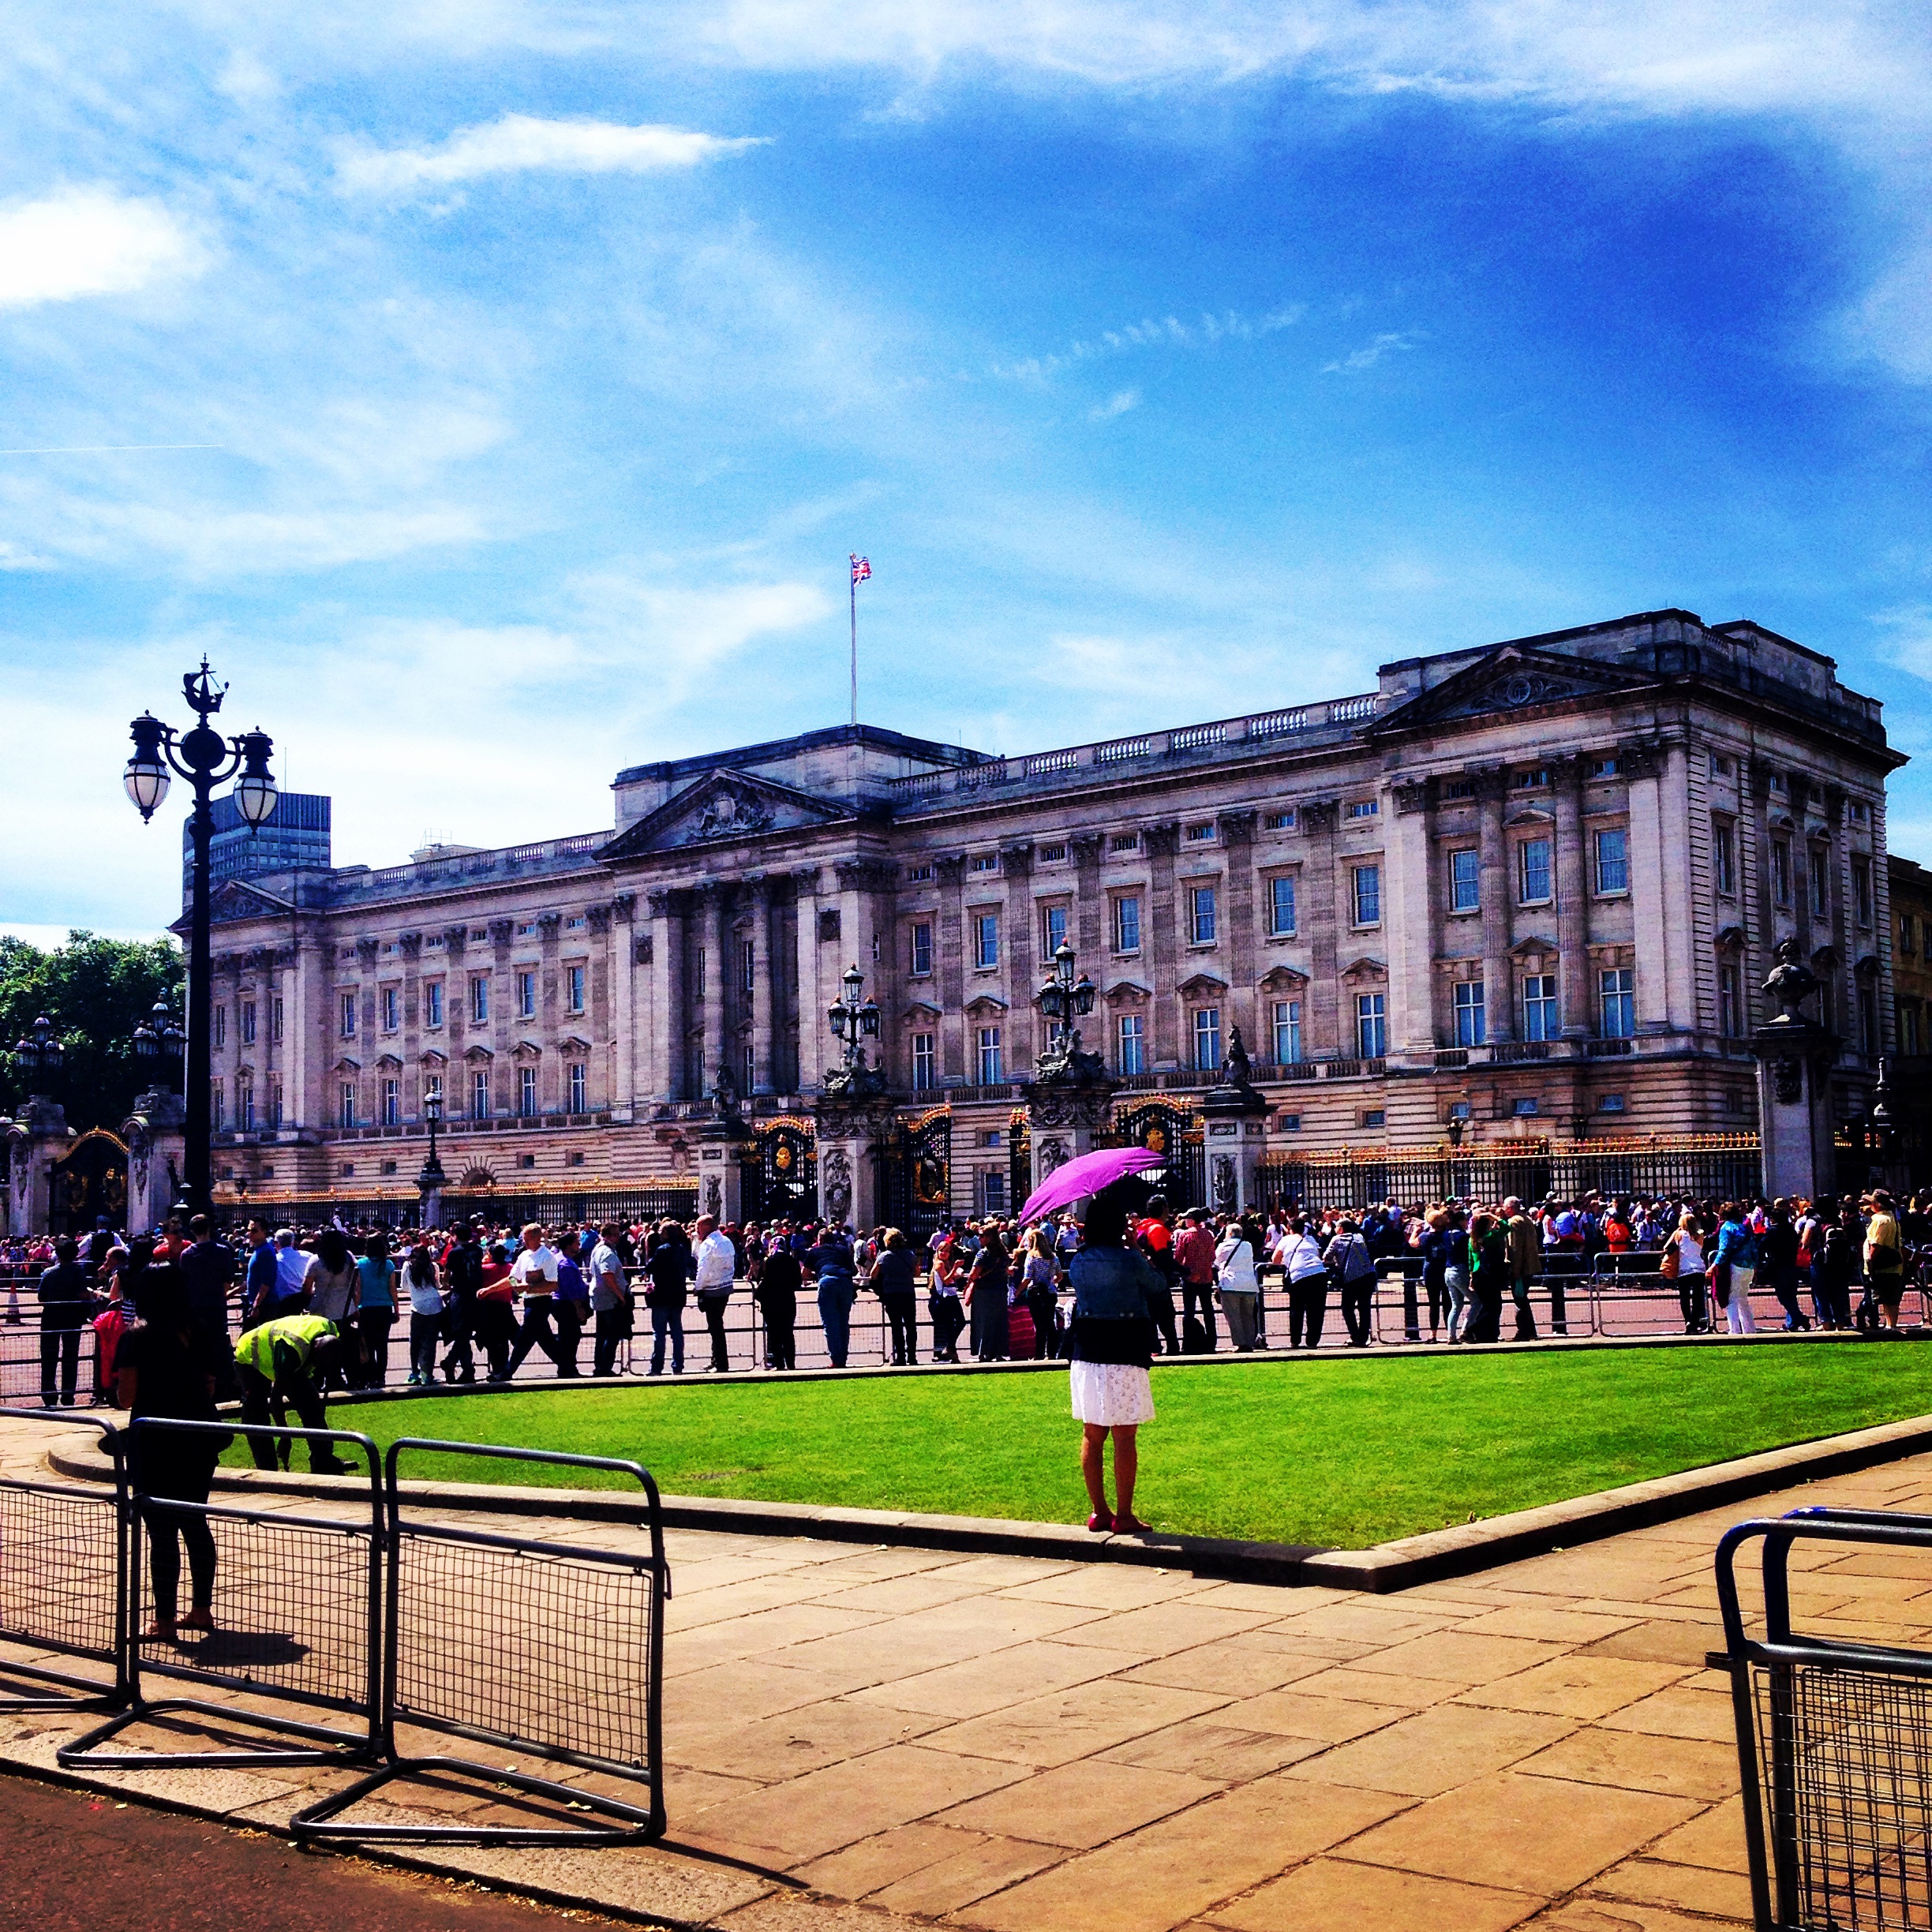 "You can call me Queen Bee #london #100happydays 30/100 at Buckingham Palace"